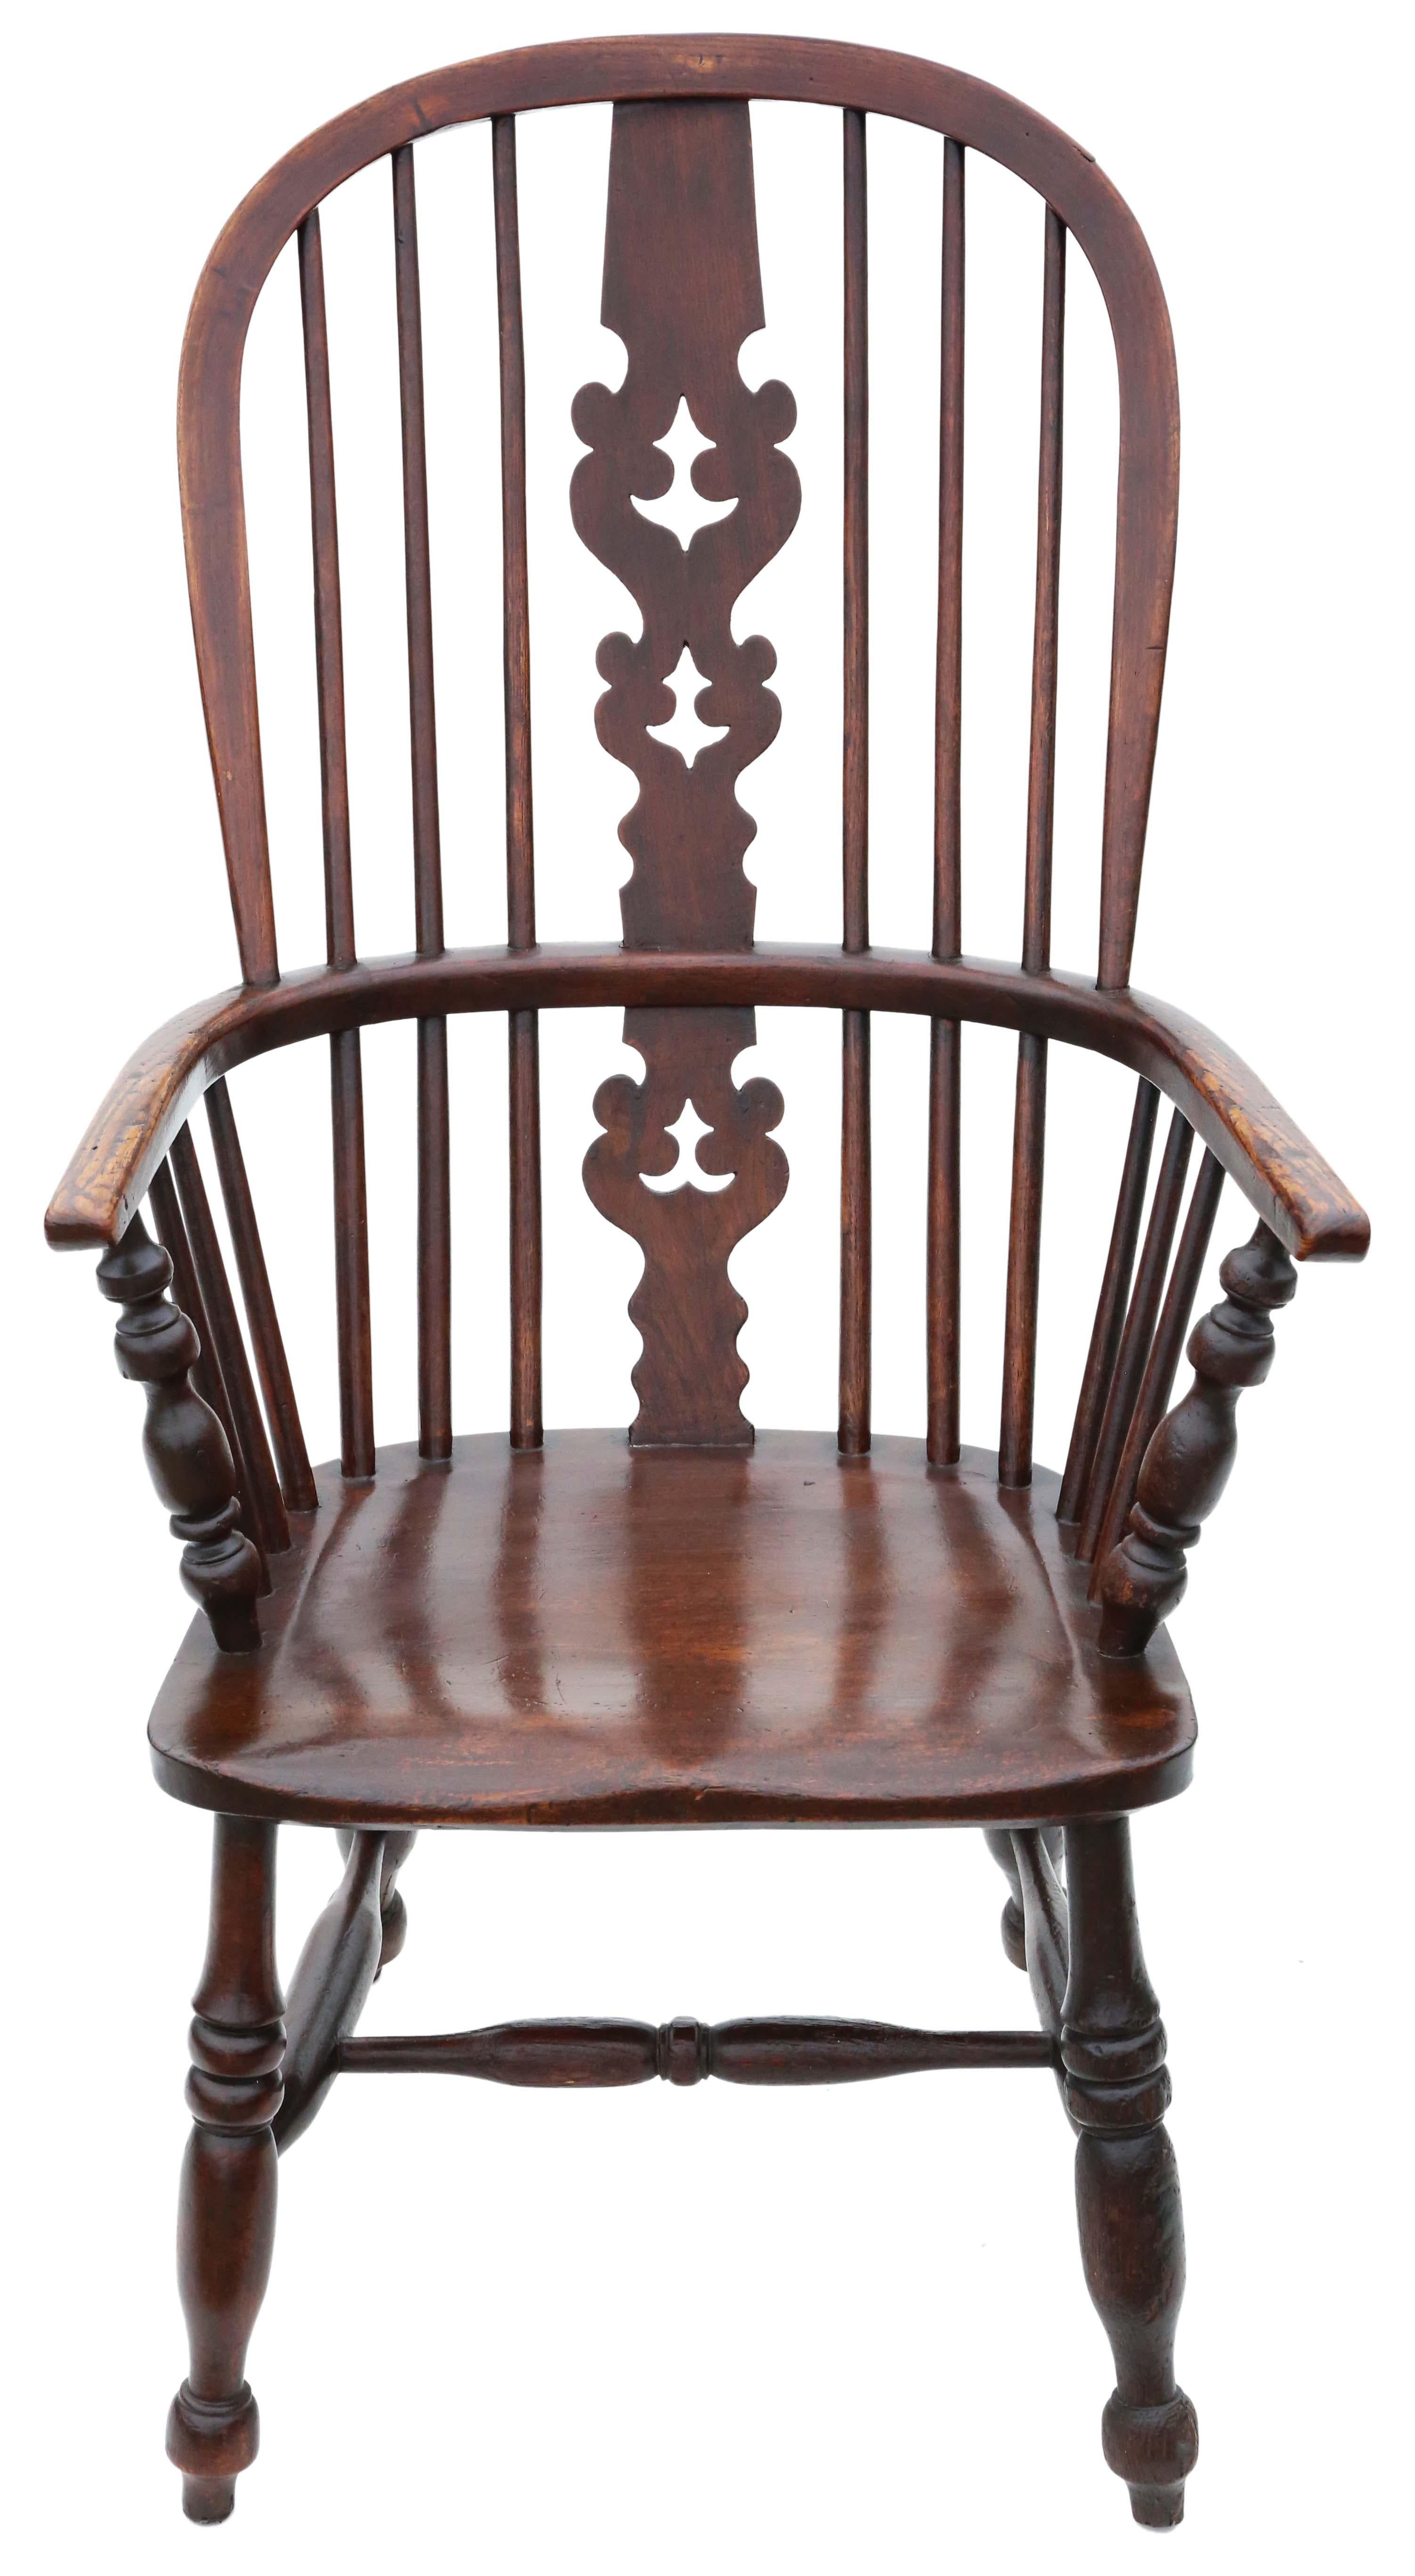 Antique quality 19th Century ash and elm Windsor chair dining armchair.

Solid and strong, with no loose joints and no woodworm. Full of age, character and charm.

Would look great in the right location!

Overall maximum dimensions: 59cmW x 68cmD x